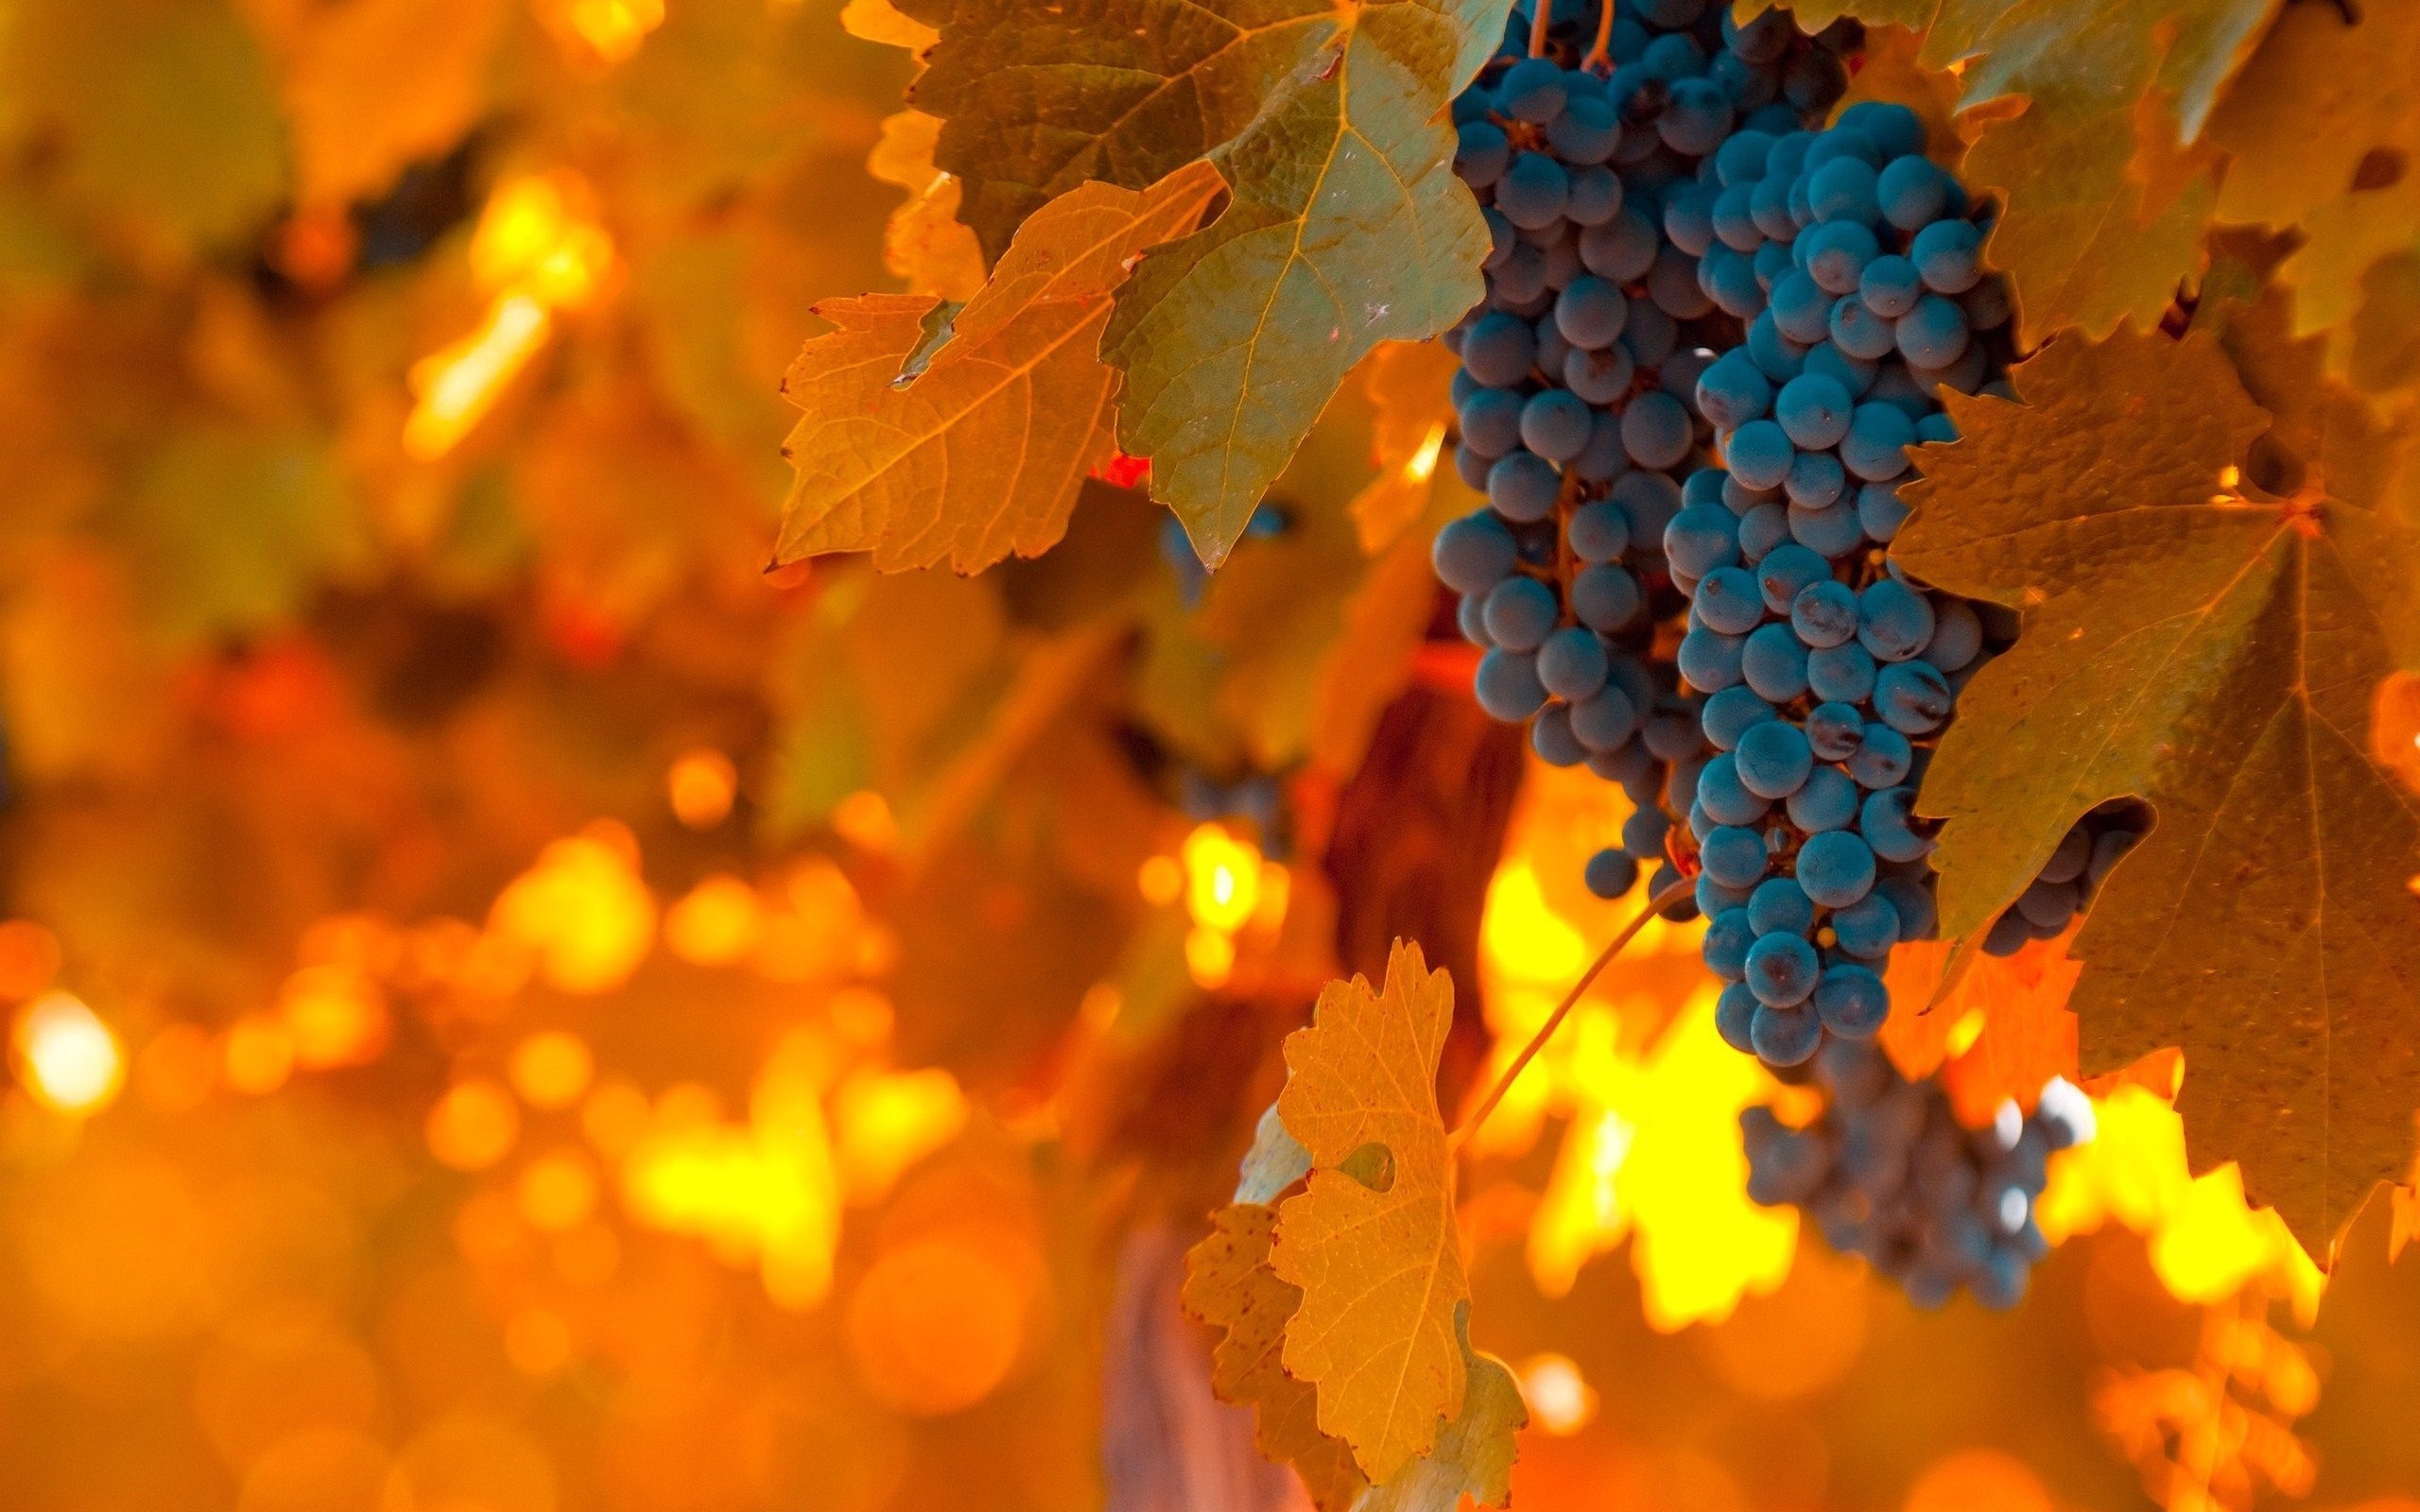 Grapes: Eaten as table fruit, dried to produce raisins, or crushed to make grape juice or wine. 2560x1600 HD Wallpaper.